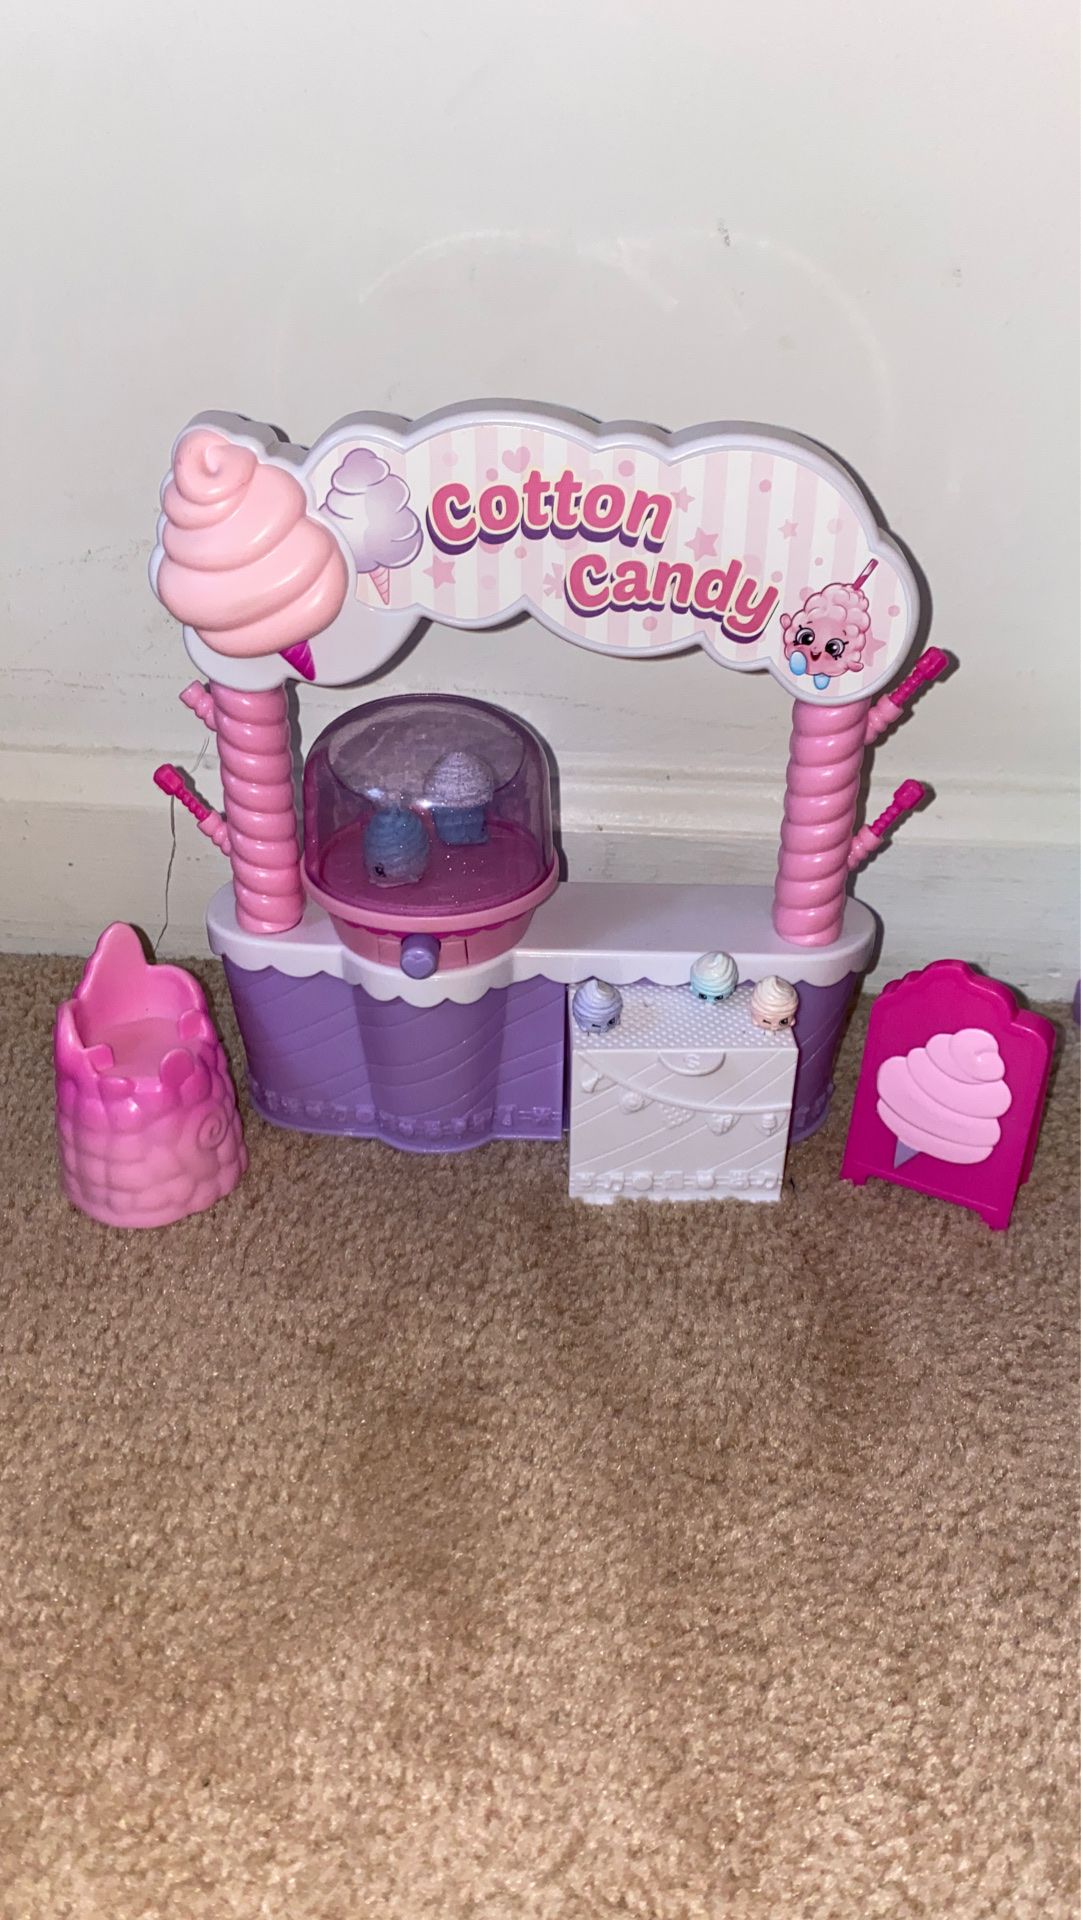 Shopkin cotton candy stand